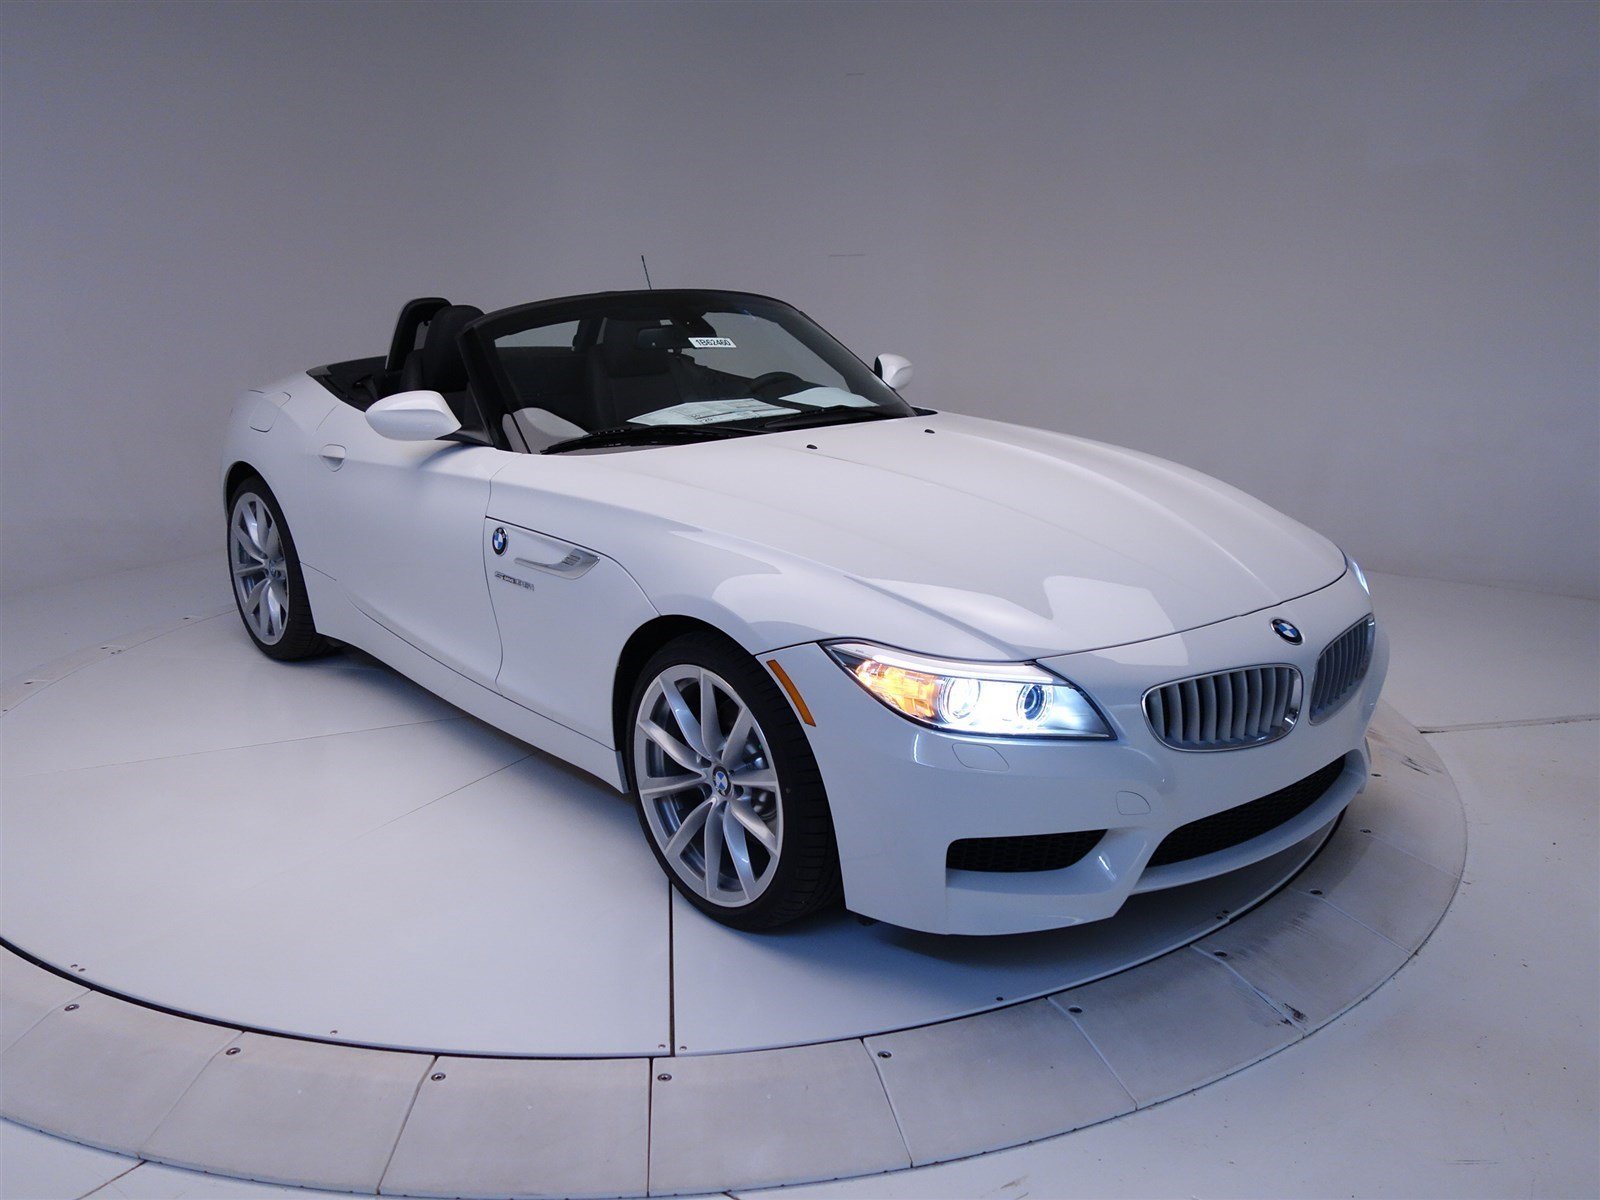 Is It A Classic? - New 2009 2010 BMW Z4 - ZPOST